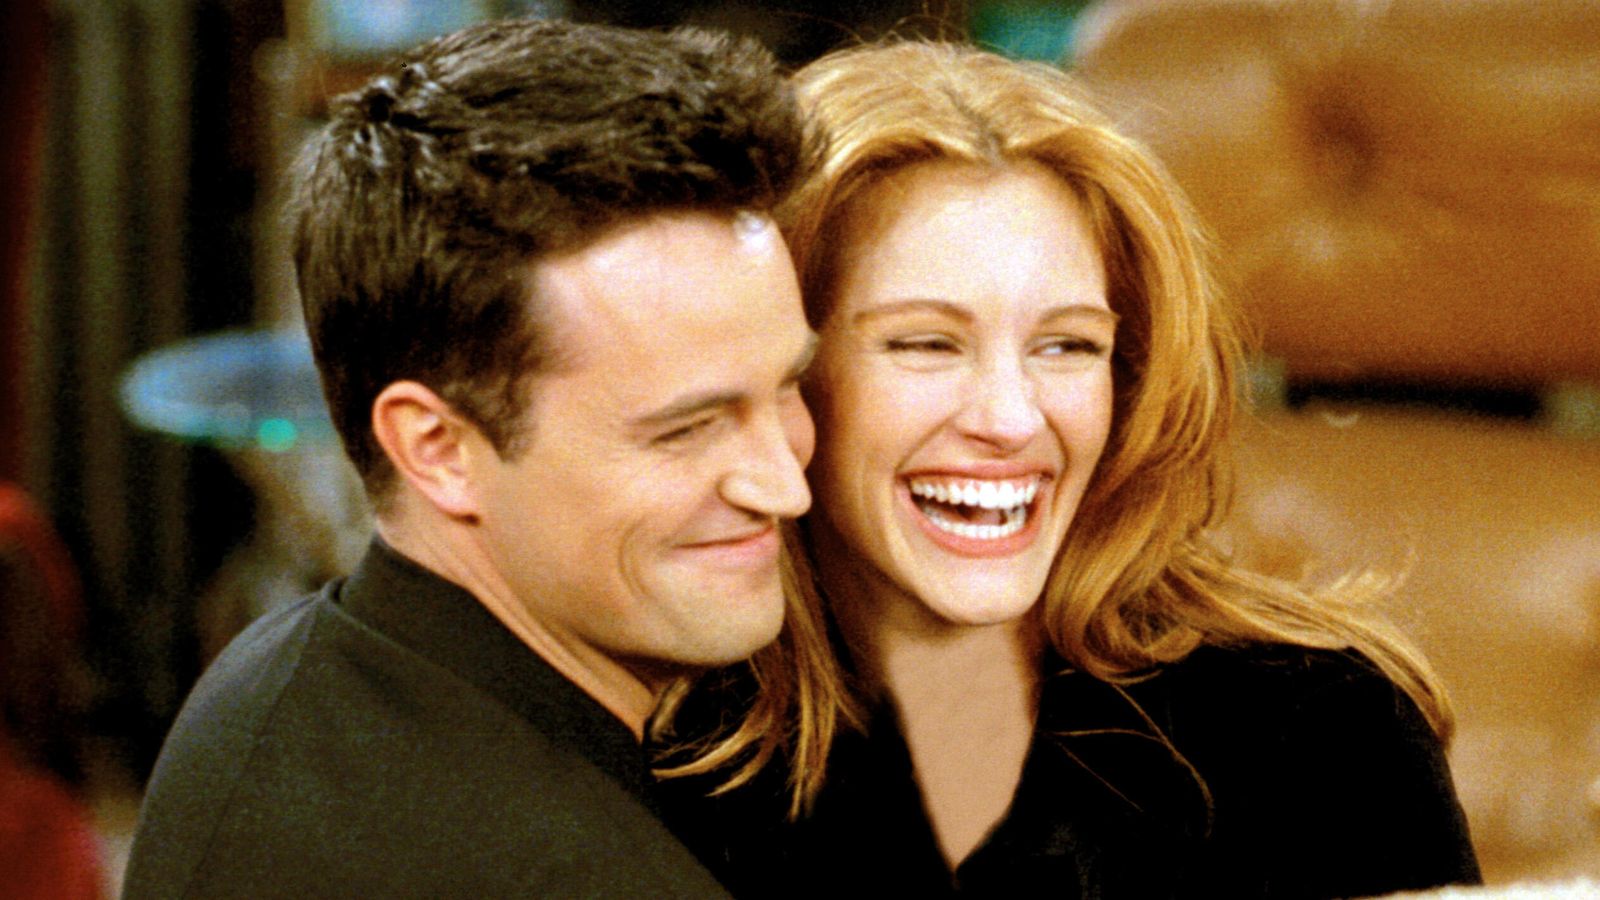 Matthew Perry: Julia Roberts reflects on Friends role and 'heartbreaking' death of 'anybody so young'